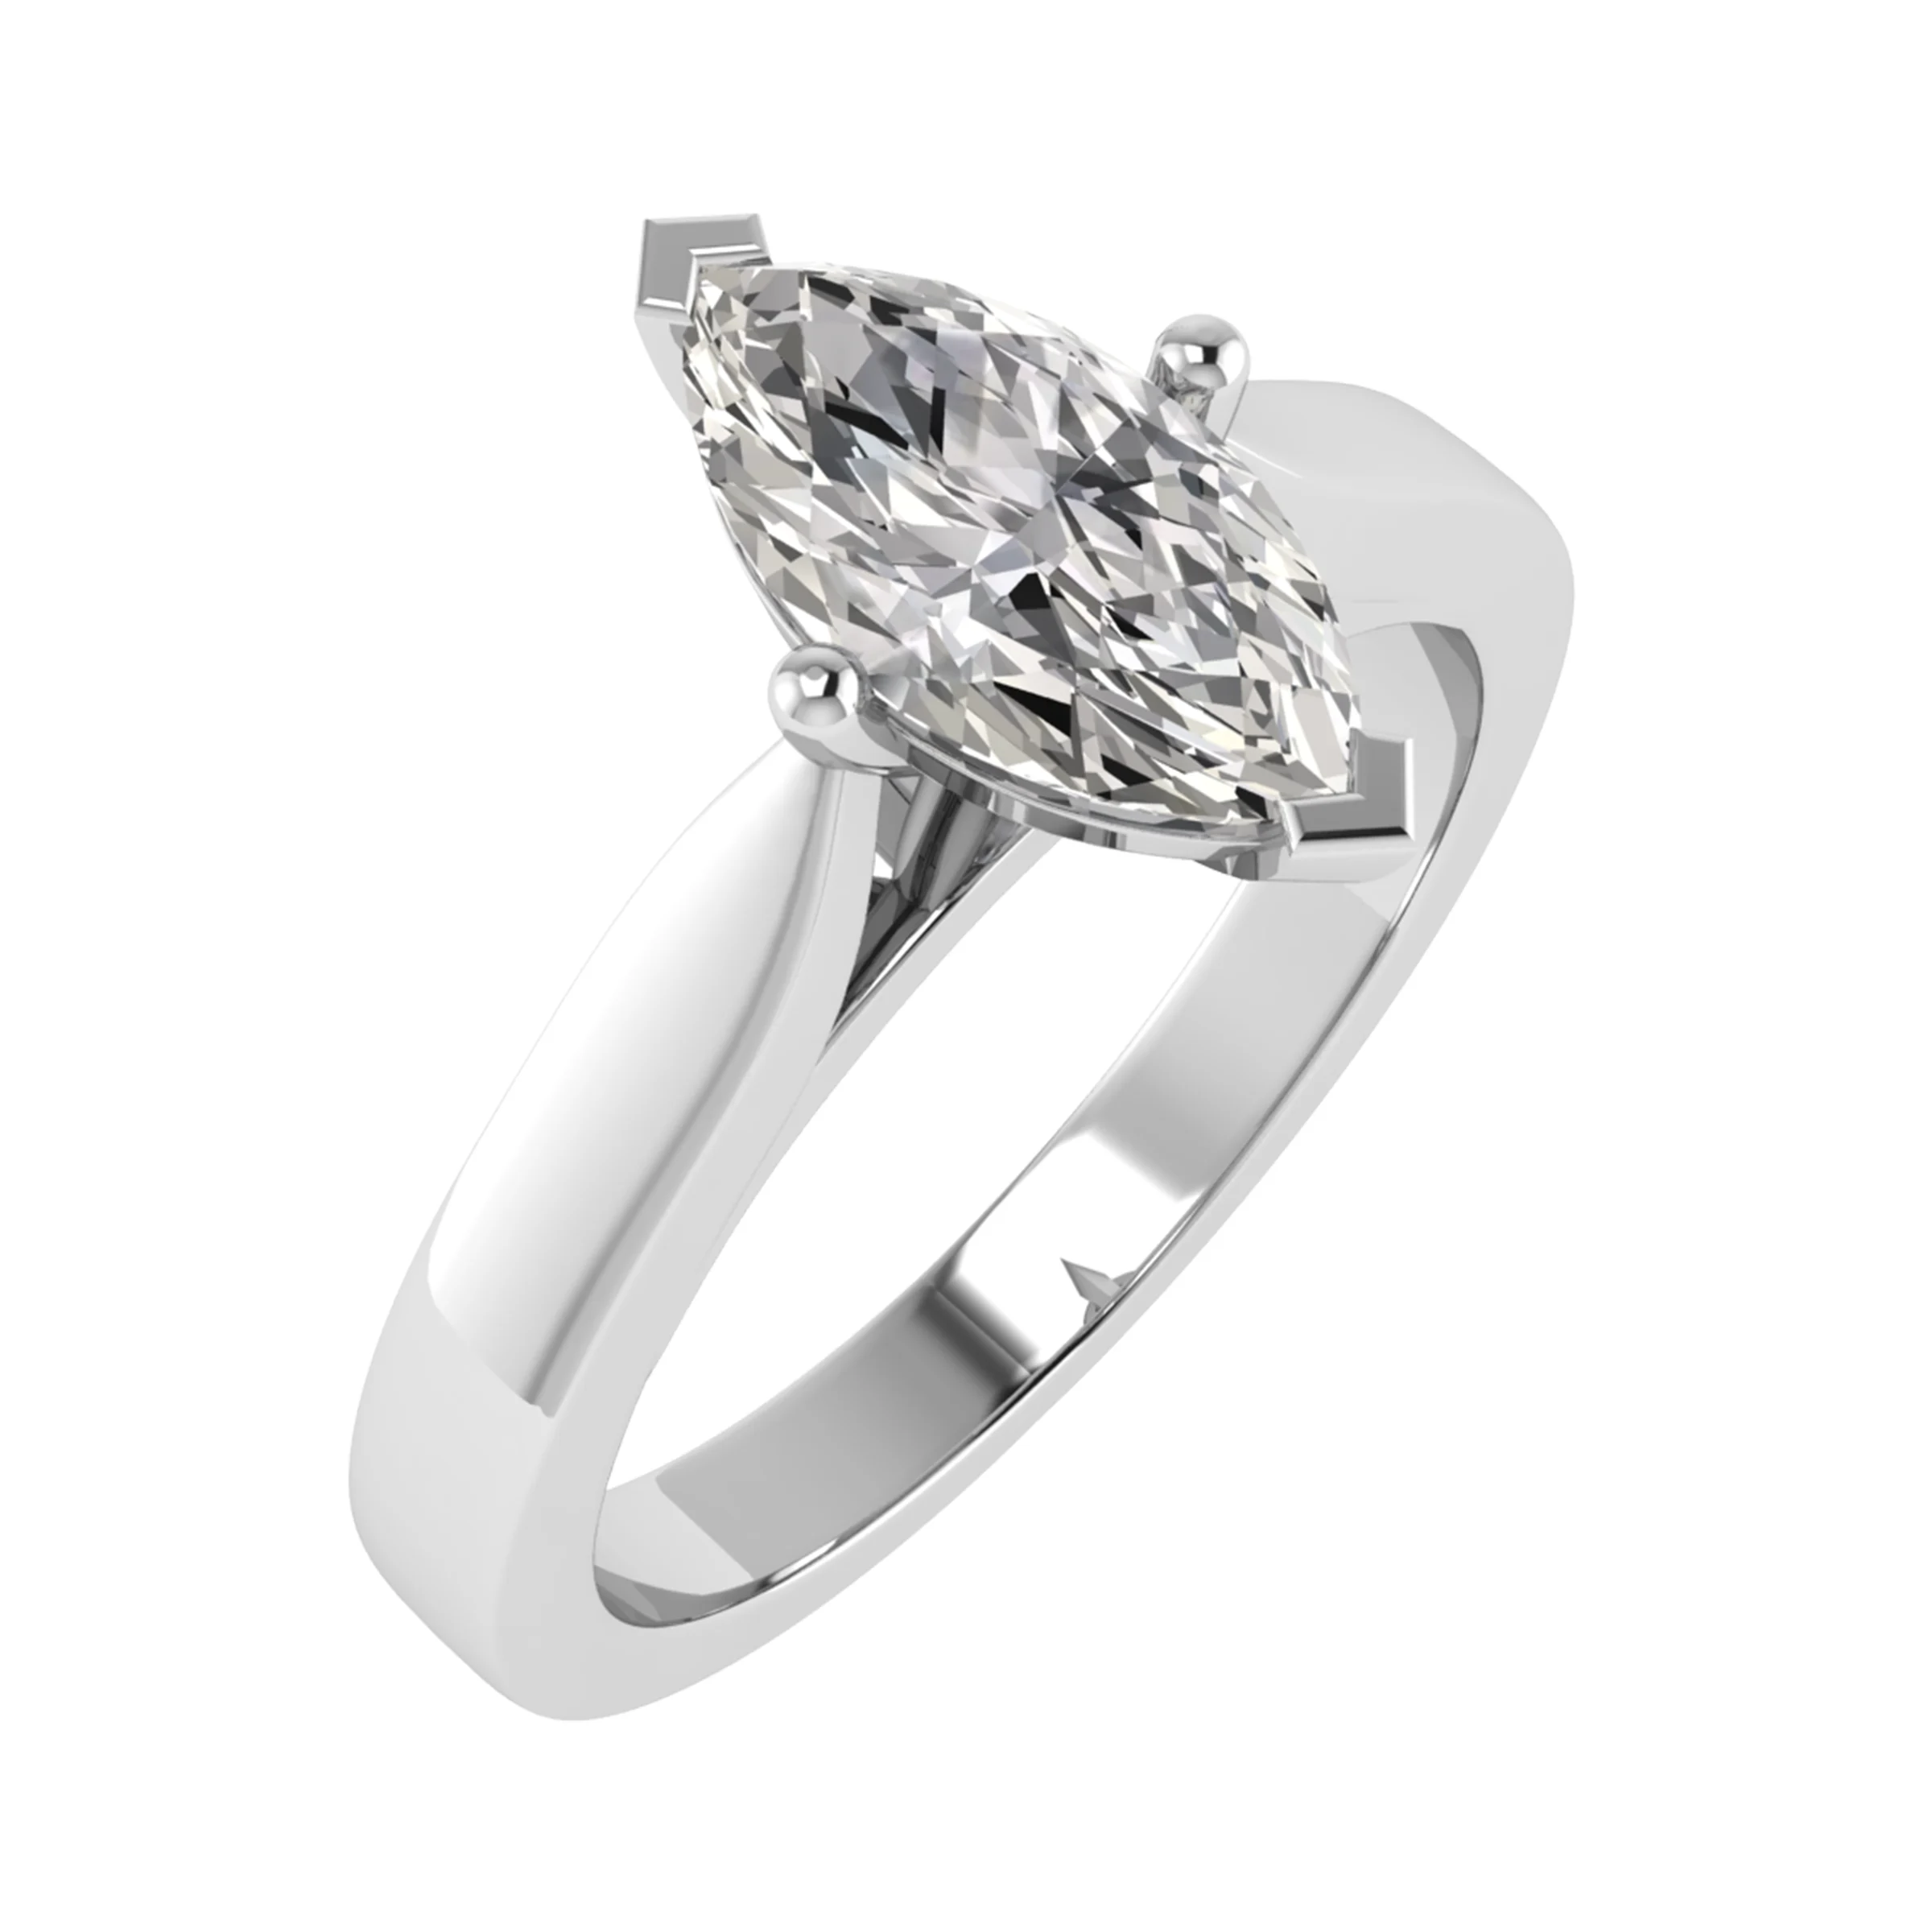 SOLITAIRE MARQUISE CUT DIAMOND ENGAGEMENT RING